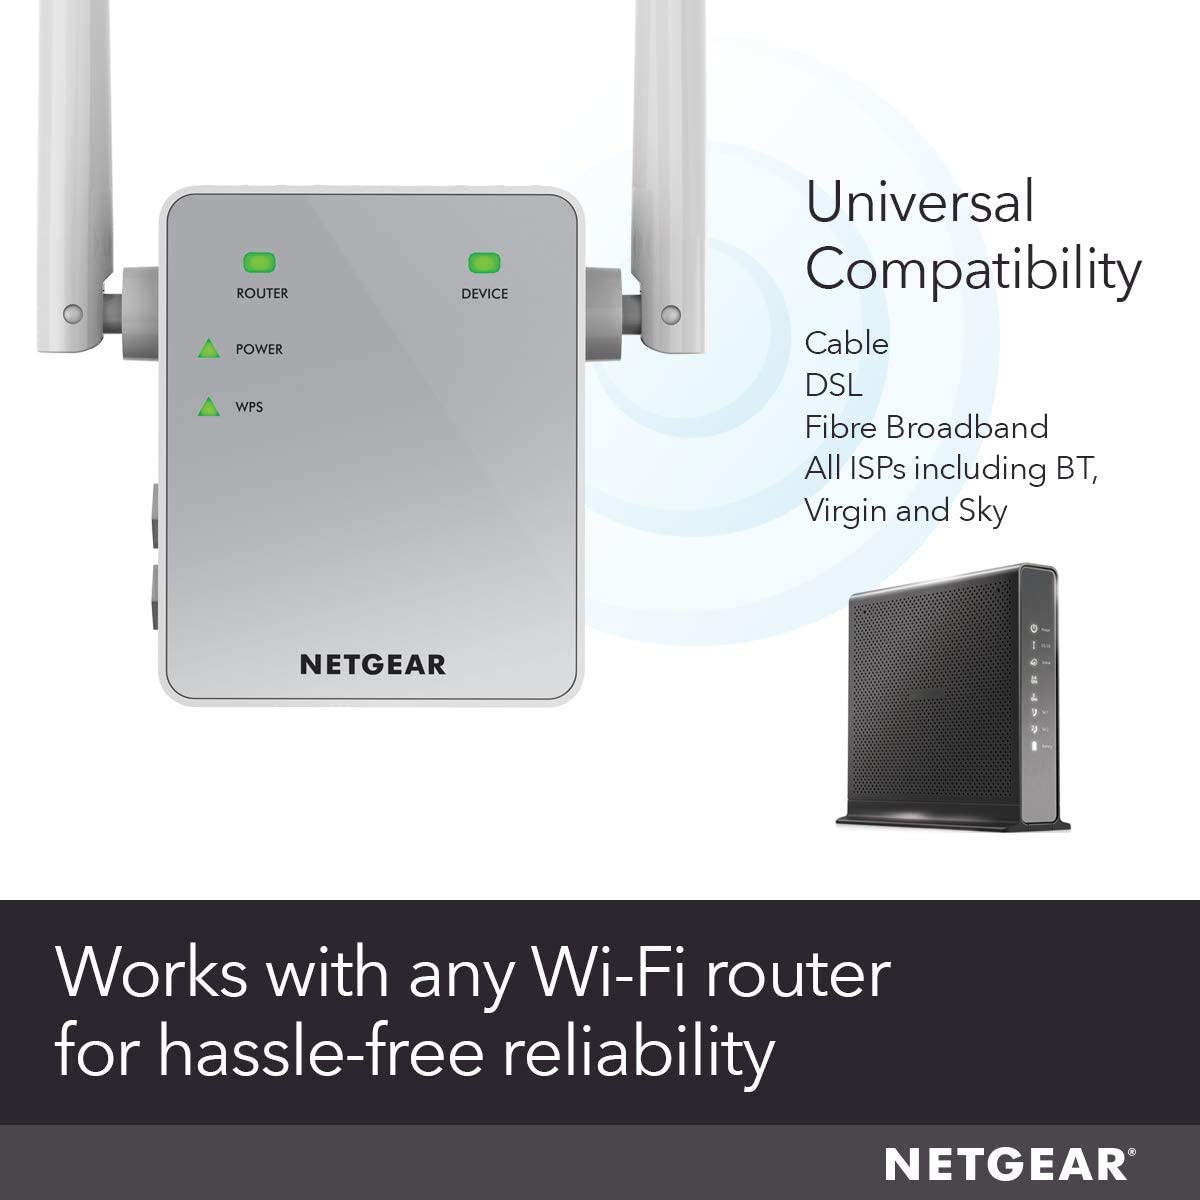 NETGEAR WiFi Booster Range Extender - Covers up to 1000 sq ft and 15 Devices with AC750 Dual Band Wireless Signal Repeater (up to 750 Mbps) and Compact Wall Plug Design with UK Plug (EX3700) WP Smart Home